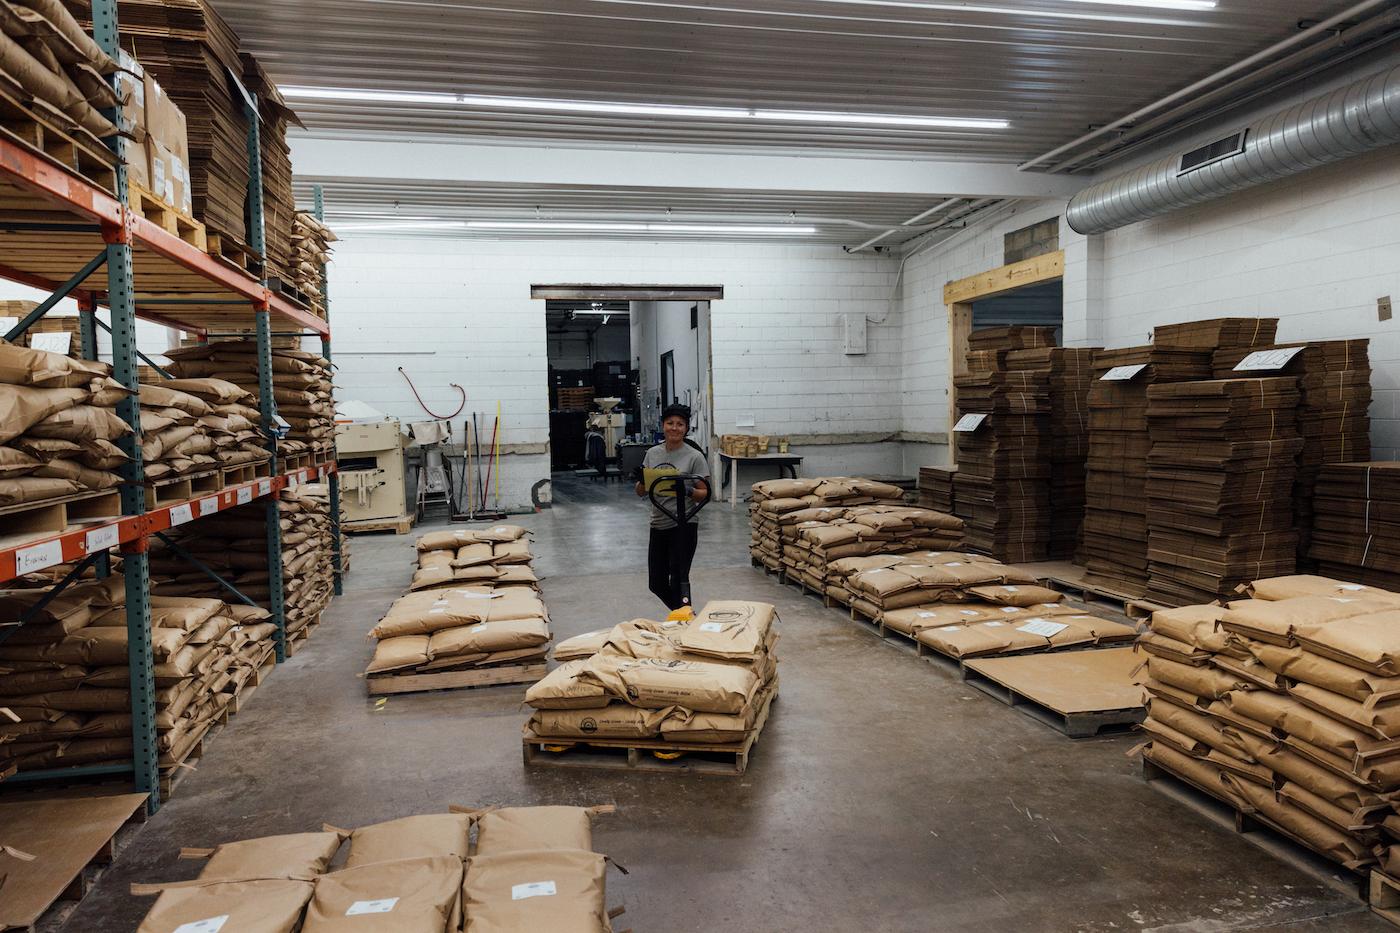 Bre Mathy pulls a pallet with bags of flour on it through a warehouse